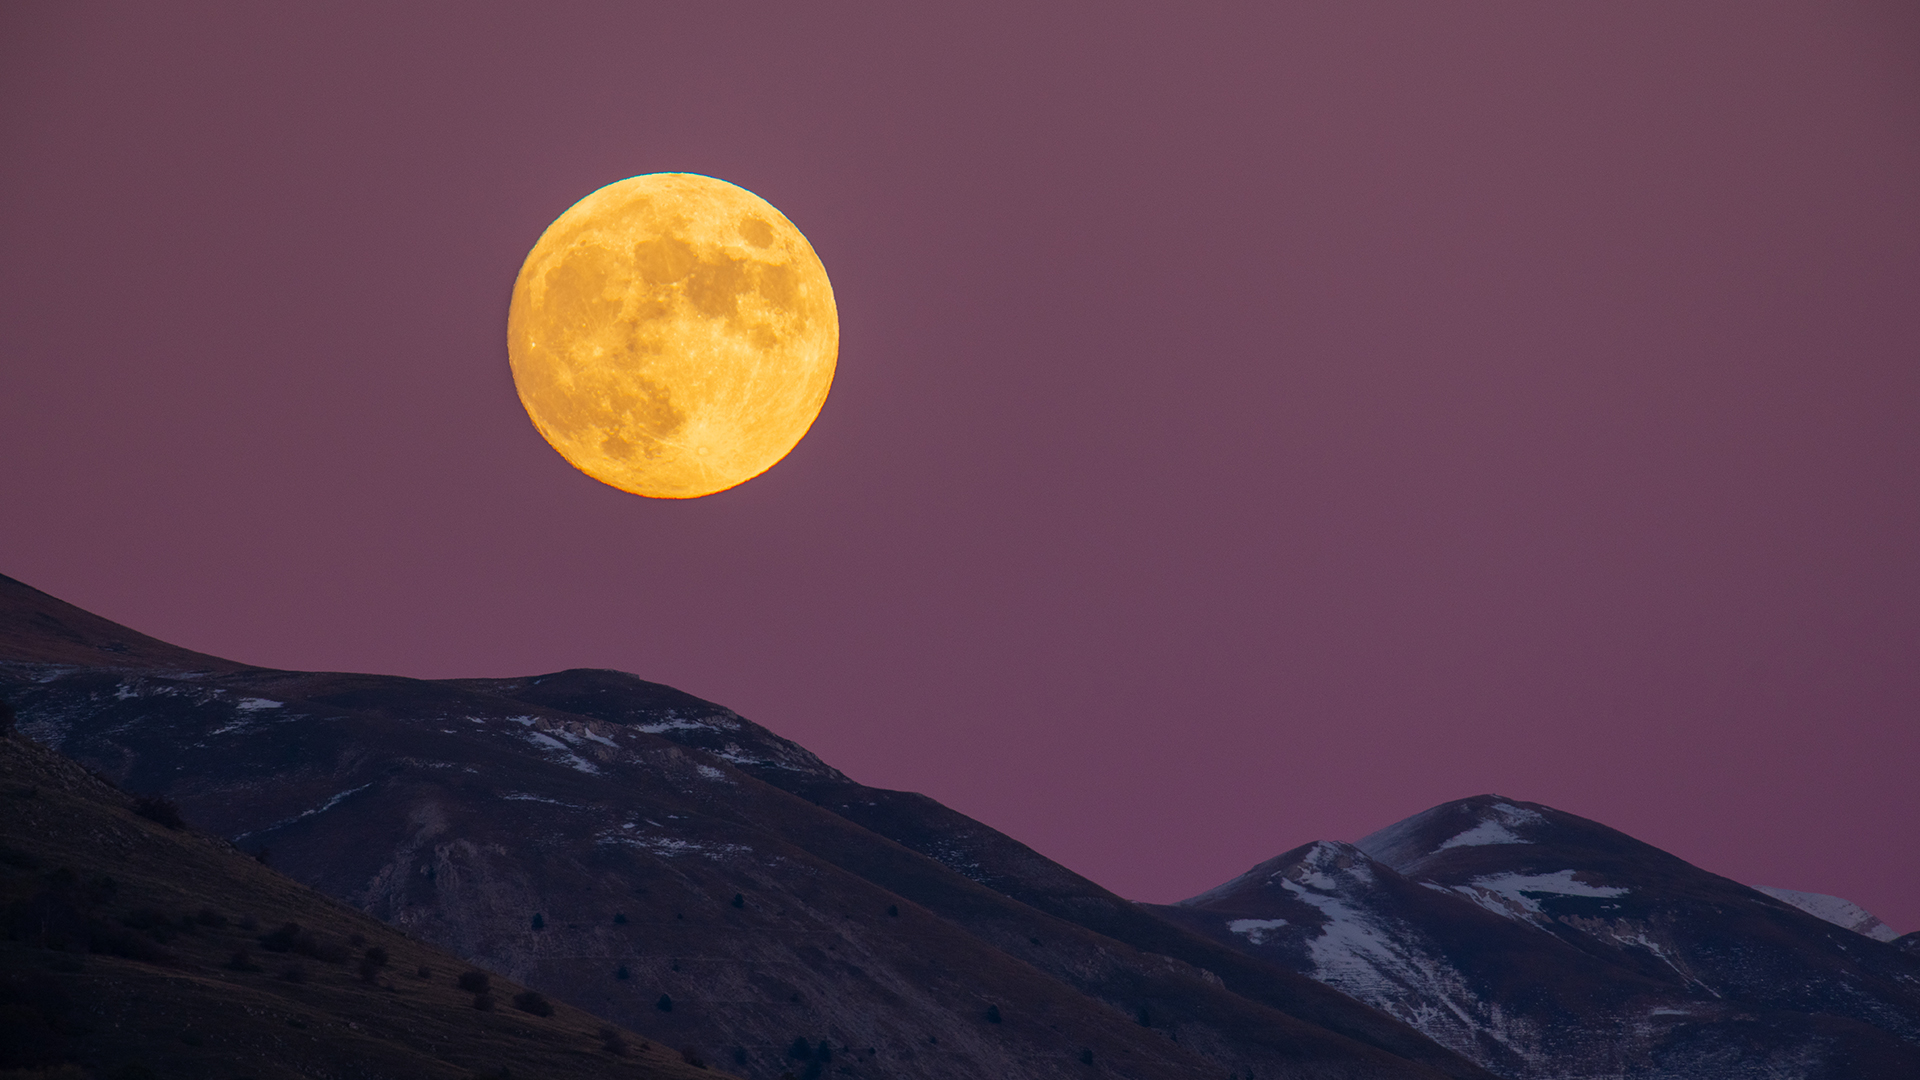 The full 'Beaver Moon' rises next to bright Jupiter this weekend. Here's how to watch.